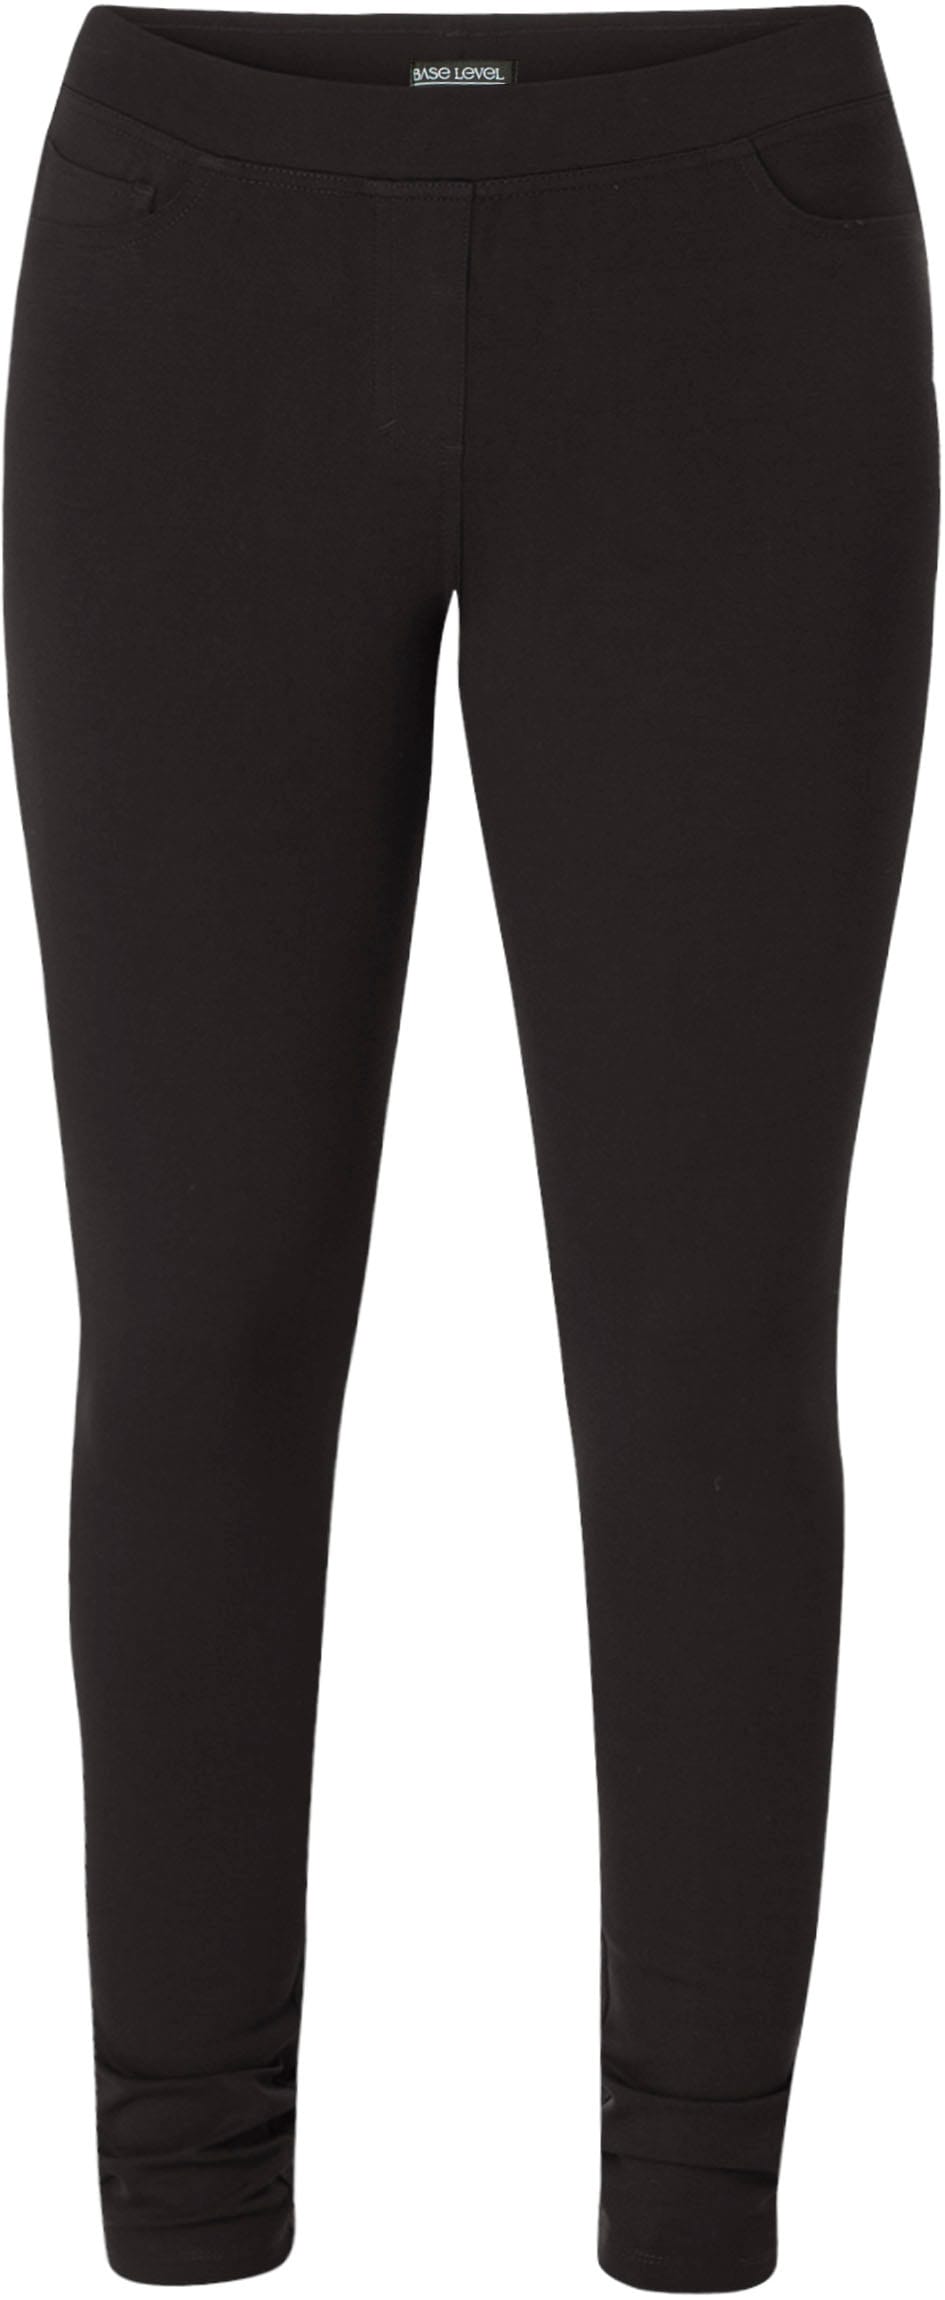 Base Level Jeggings Material Bequemes »Ornika«, bei in ♕ Skinny-Fit-Optik